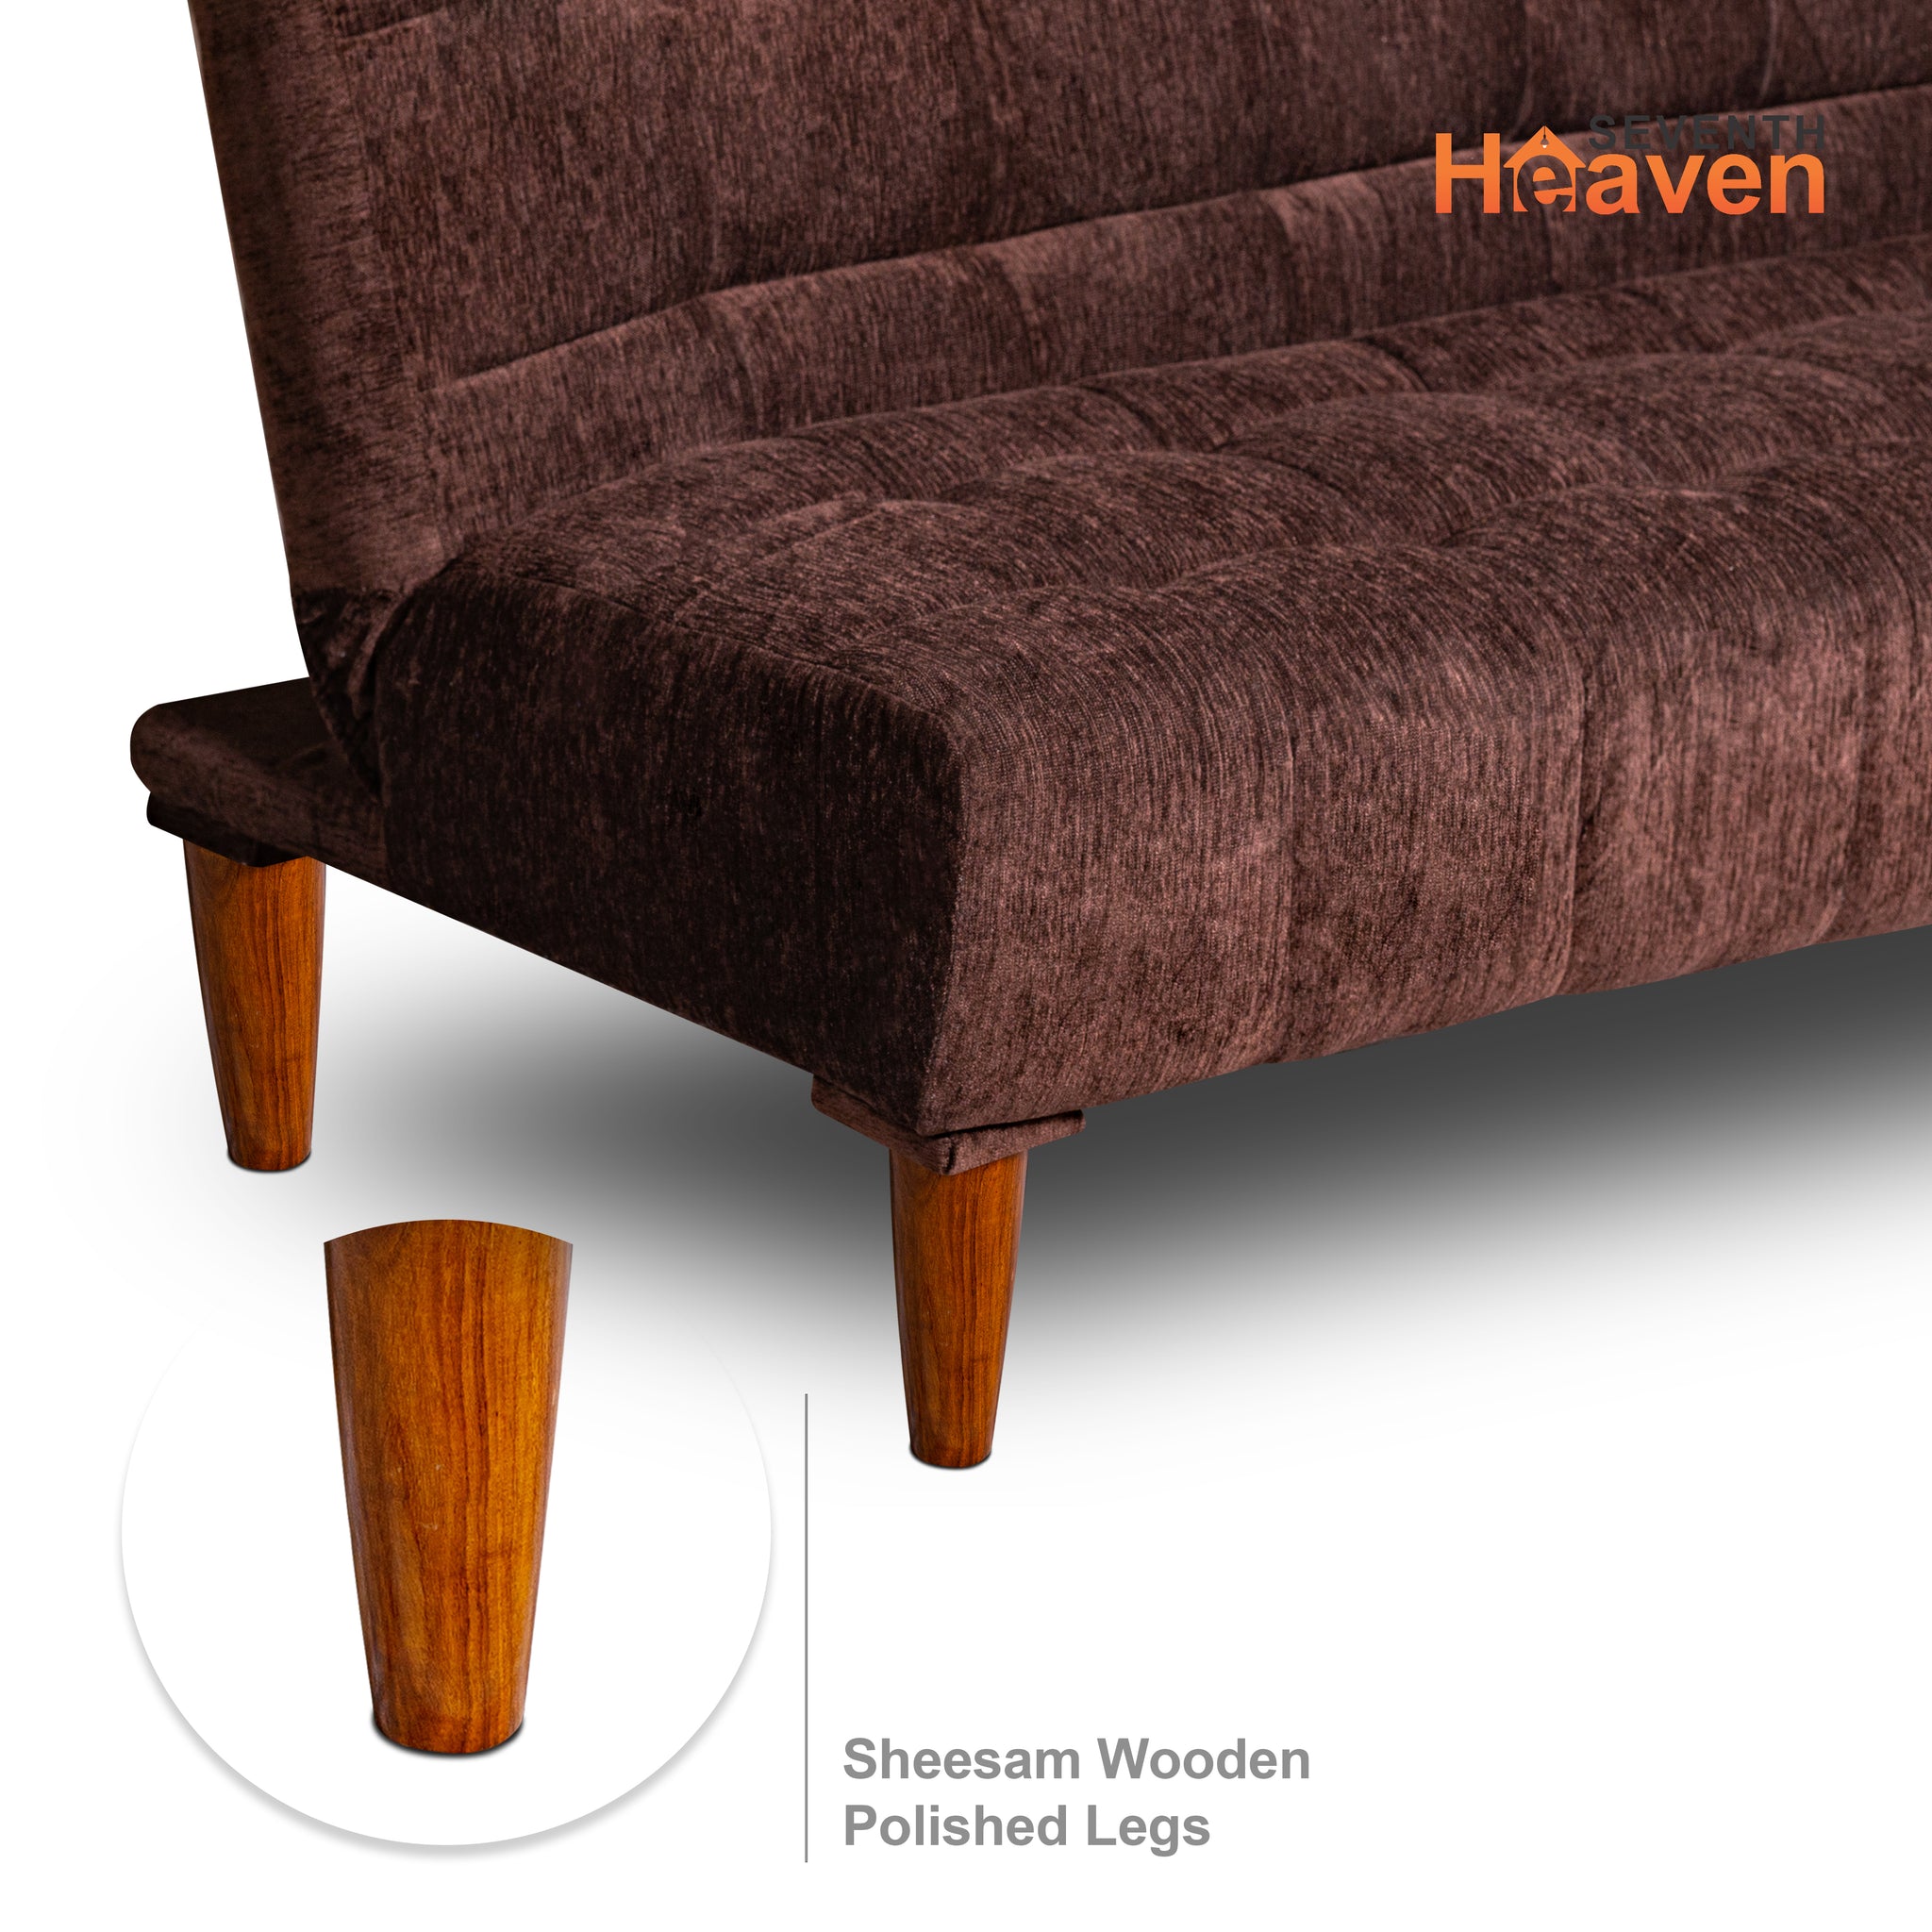 Seventh Heaven Florida 4 Seater Wooden Sofa Cum Bed. Modern & Elegant Smart Furniture Range for luxurious homes, living rooms and offices. Use as a sofa, lounger or bed. Perfect for guests. Molphino fabric with sheesham polished wooden legs. Brown colour.